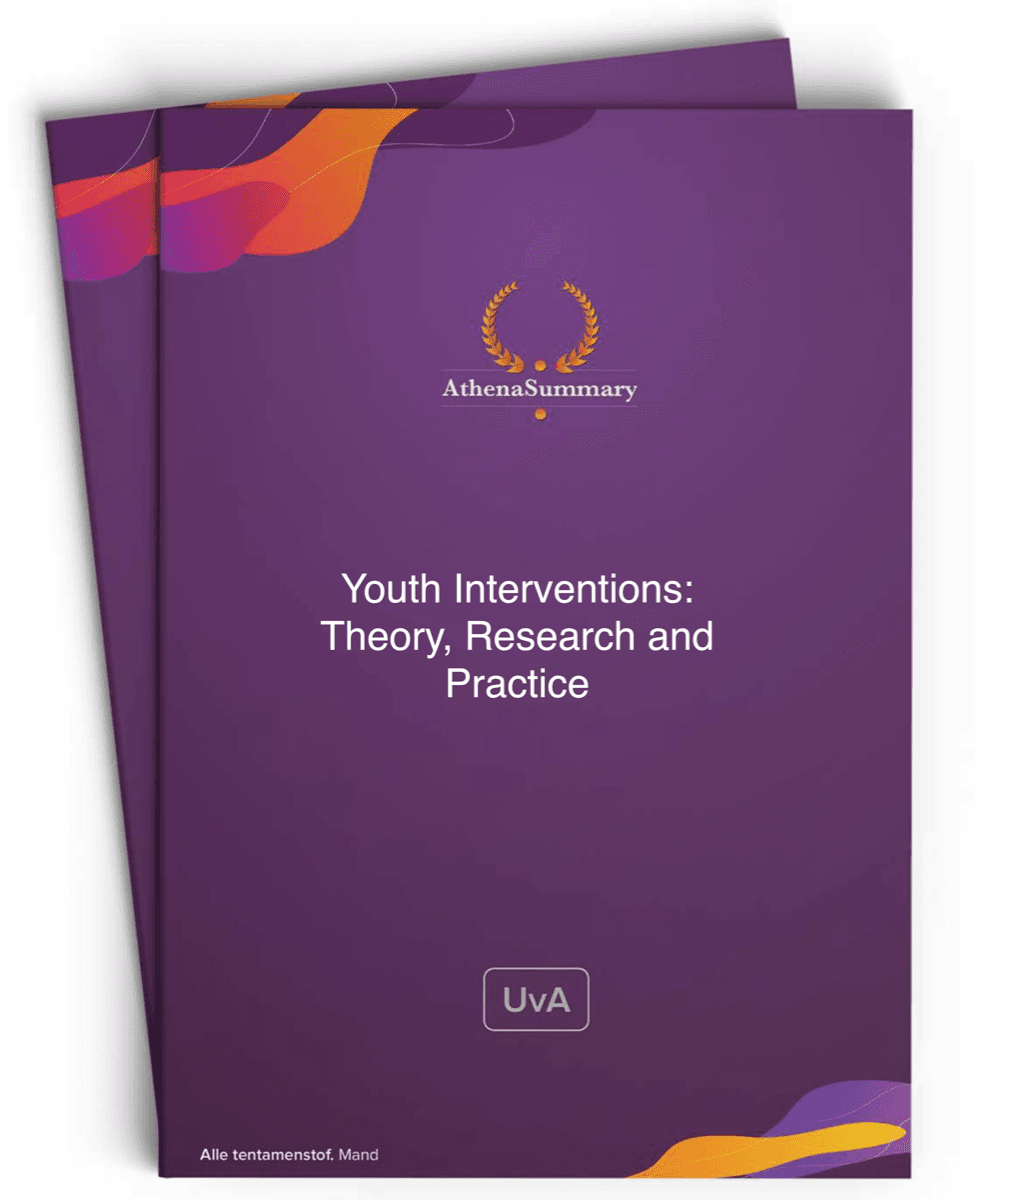 Literature Summary: Youth Interventions: Theory, Research and Practice